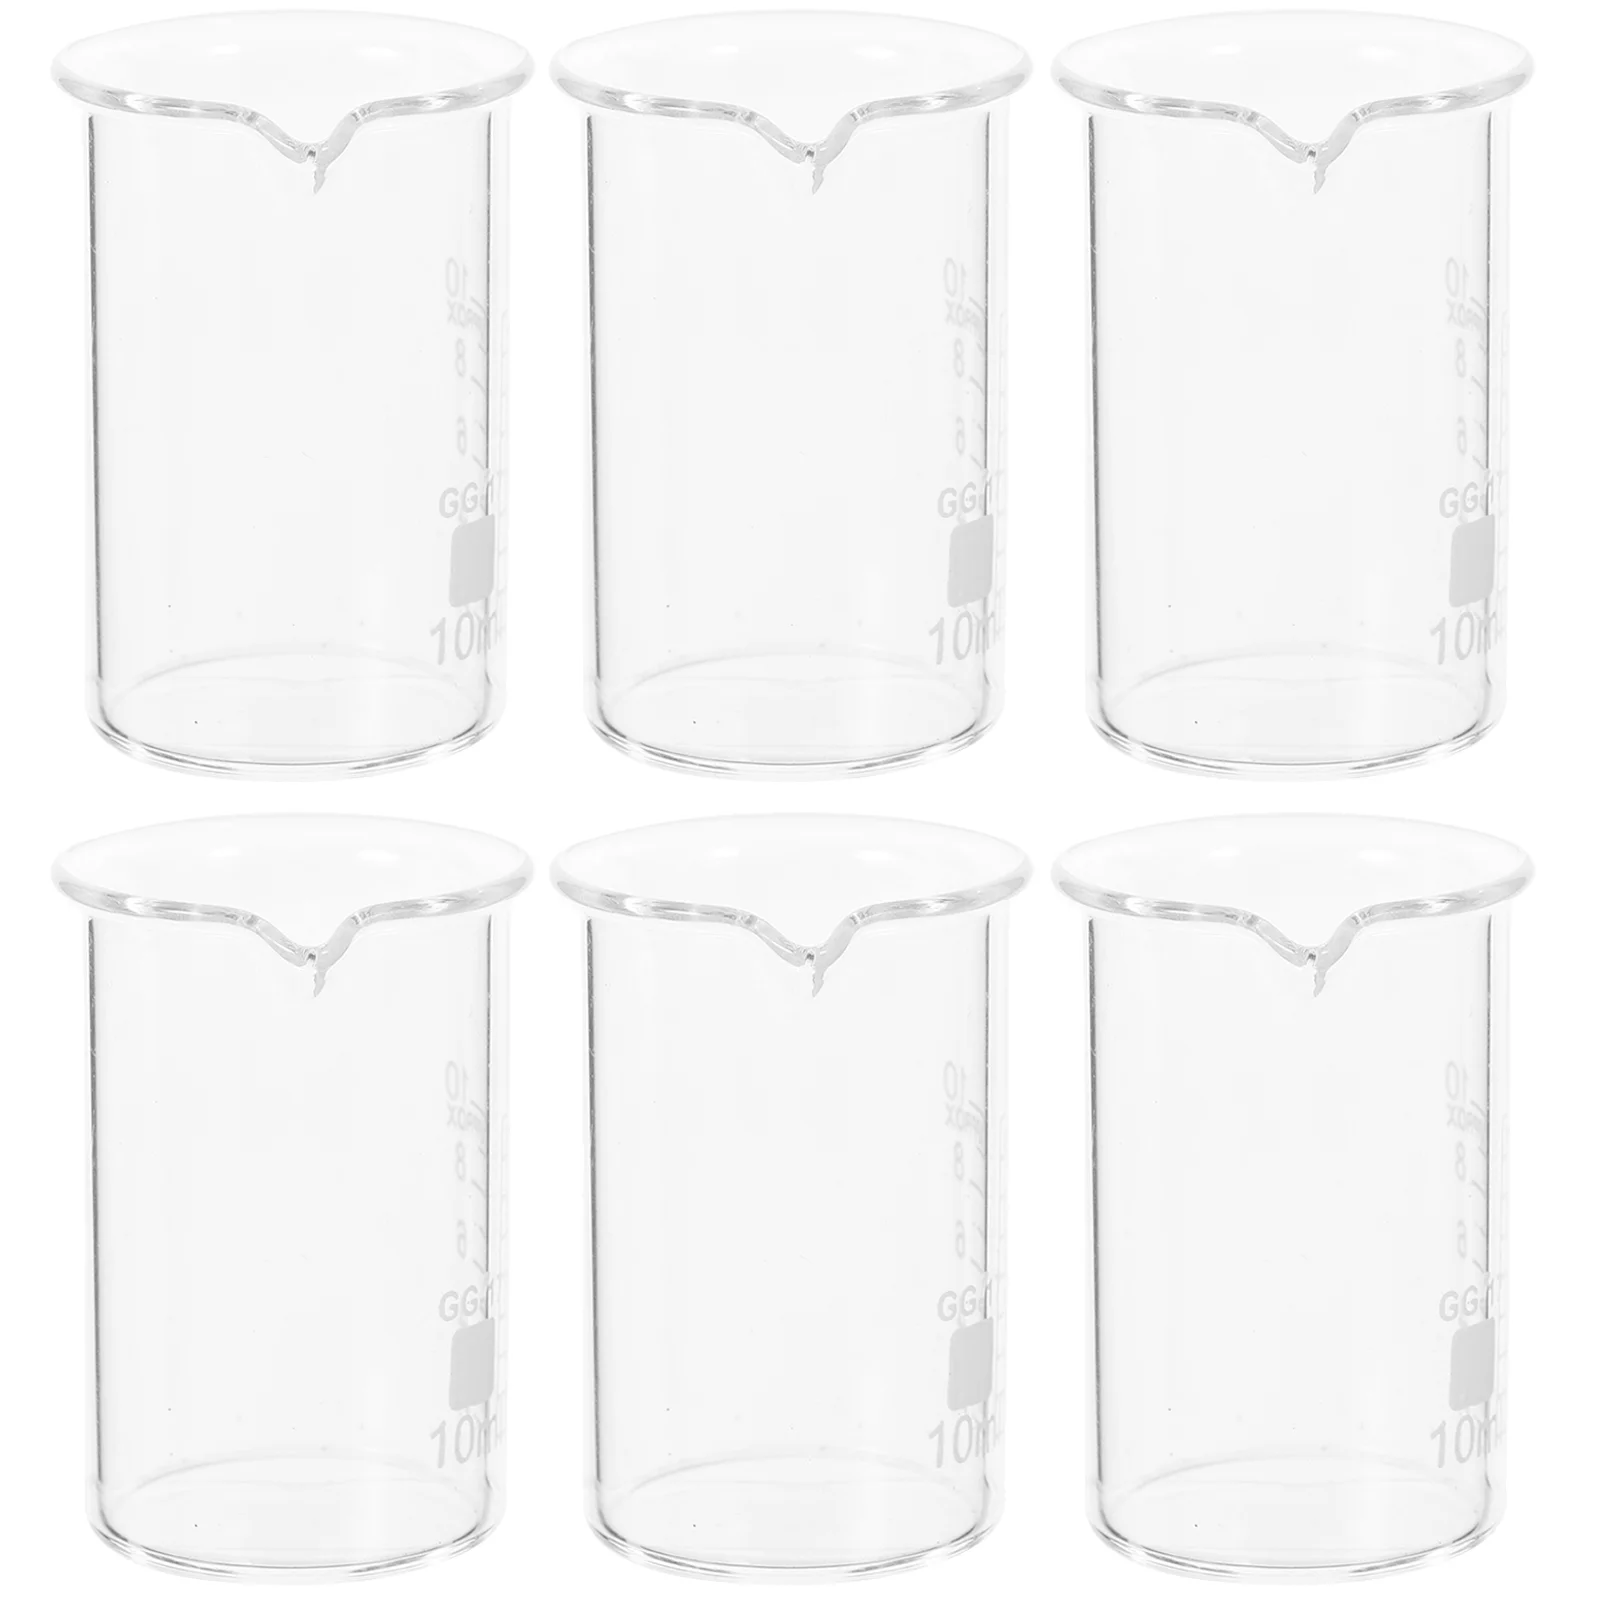 

6 Pcs Lab Supplies Glass Beakers Measuring Cups High Temperature Resistance Liquid Laboratory Chemistry Tools